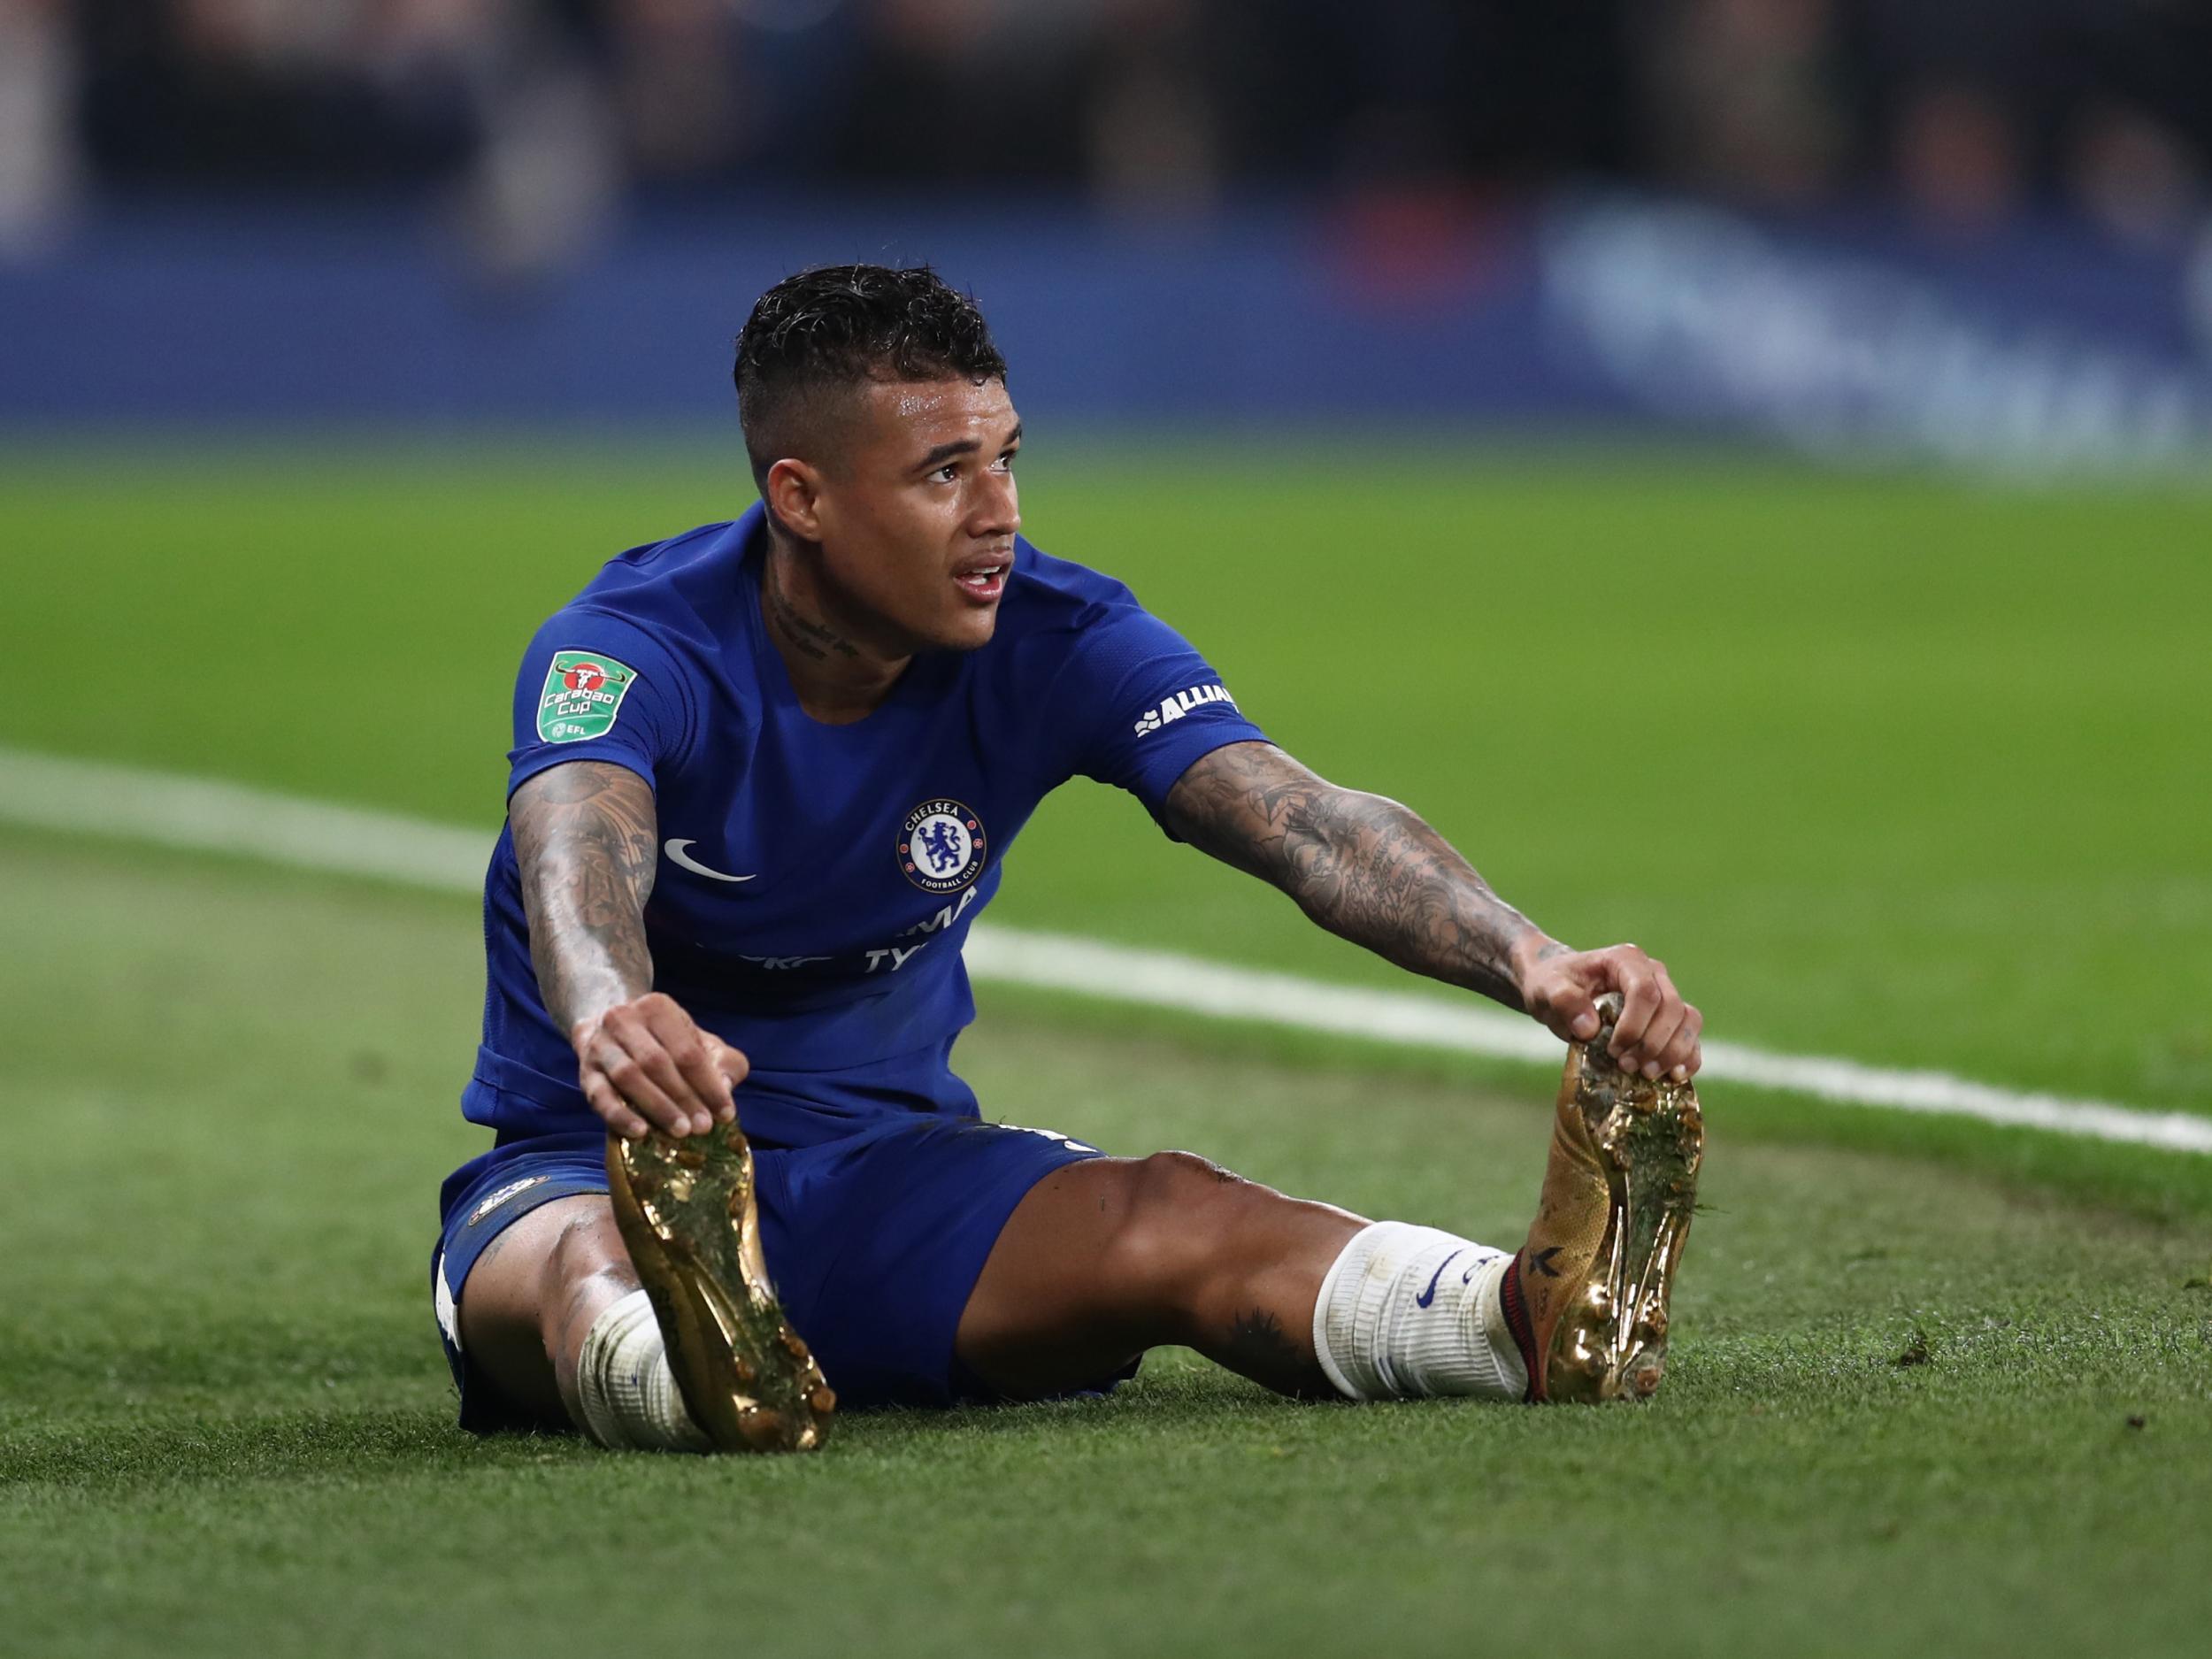 Kenedy was impressive in his final game for Chelsea